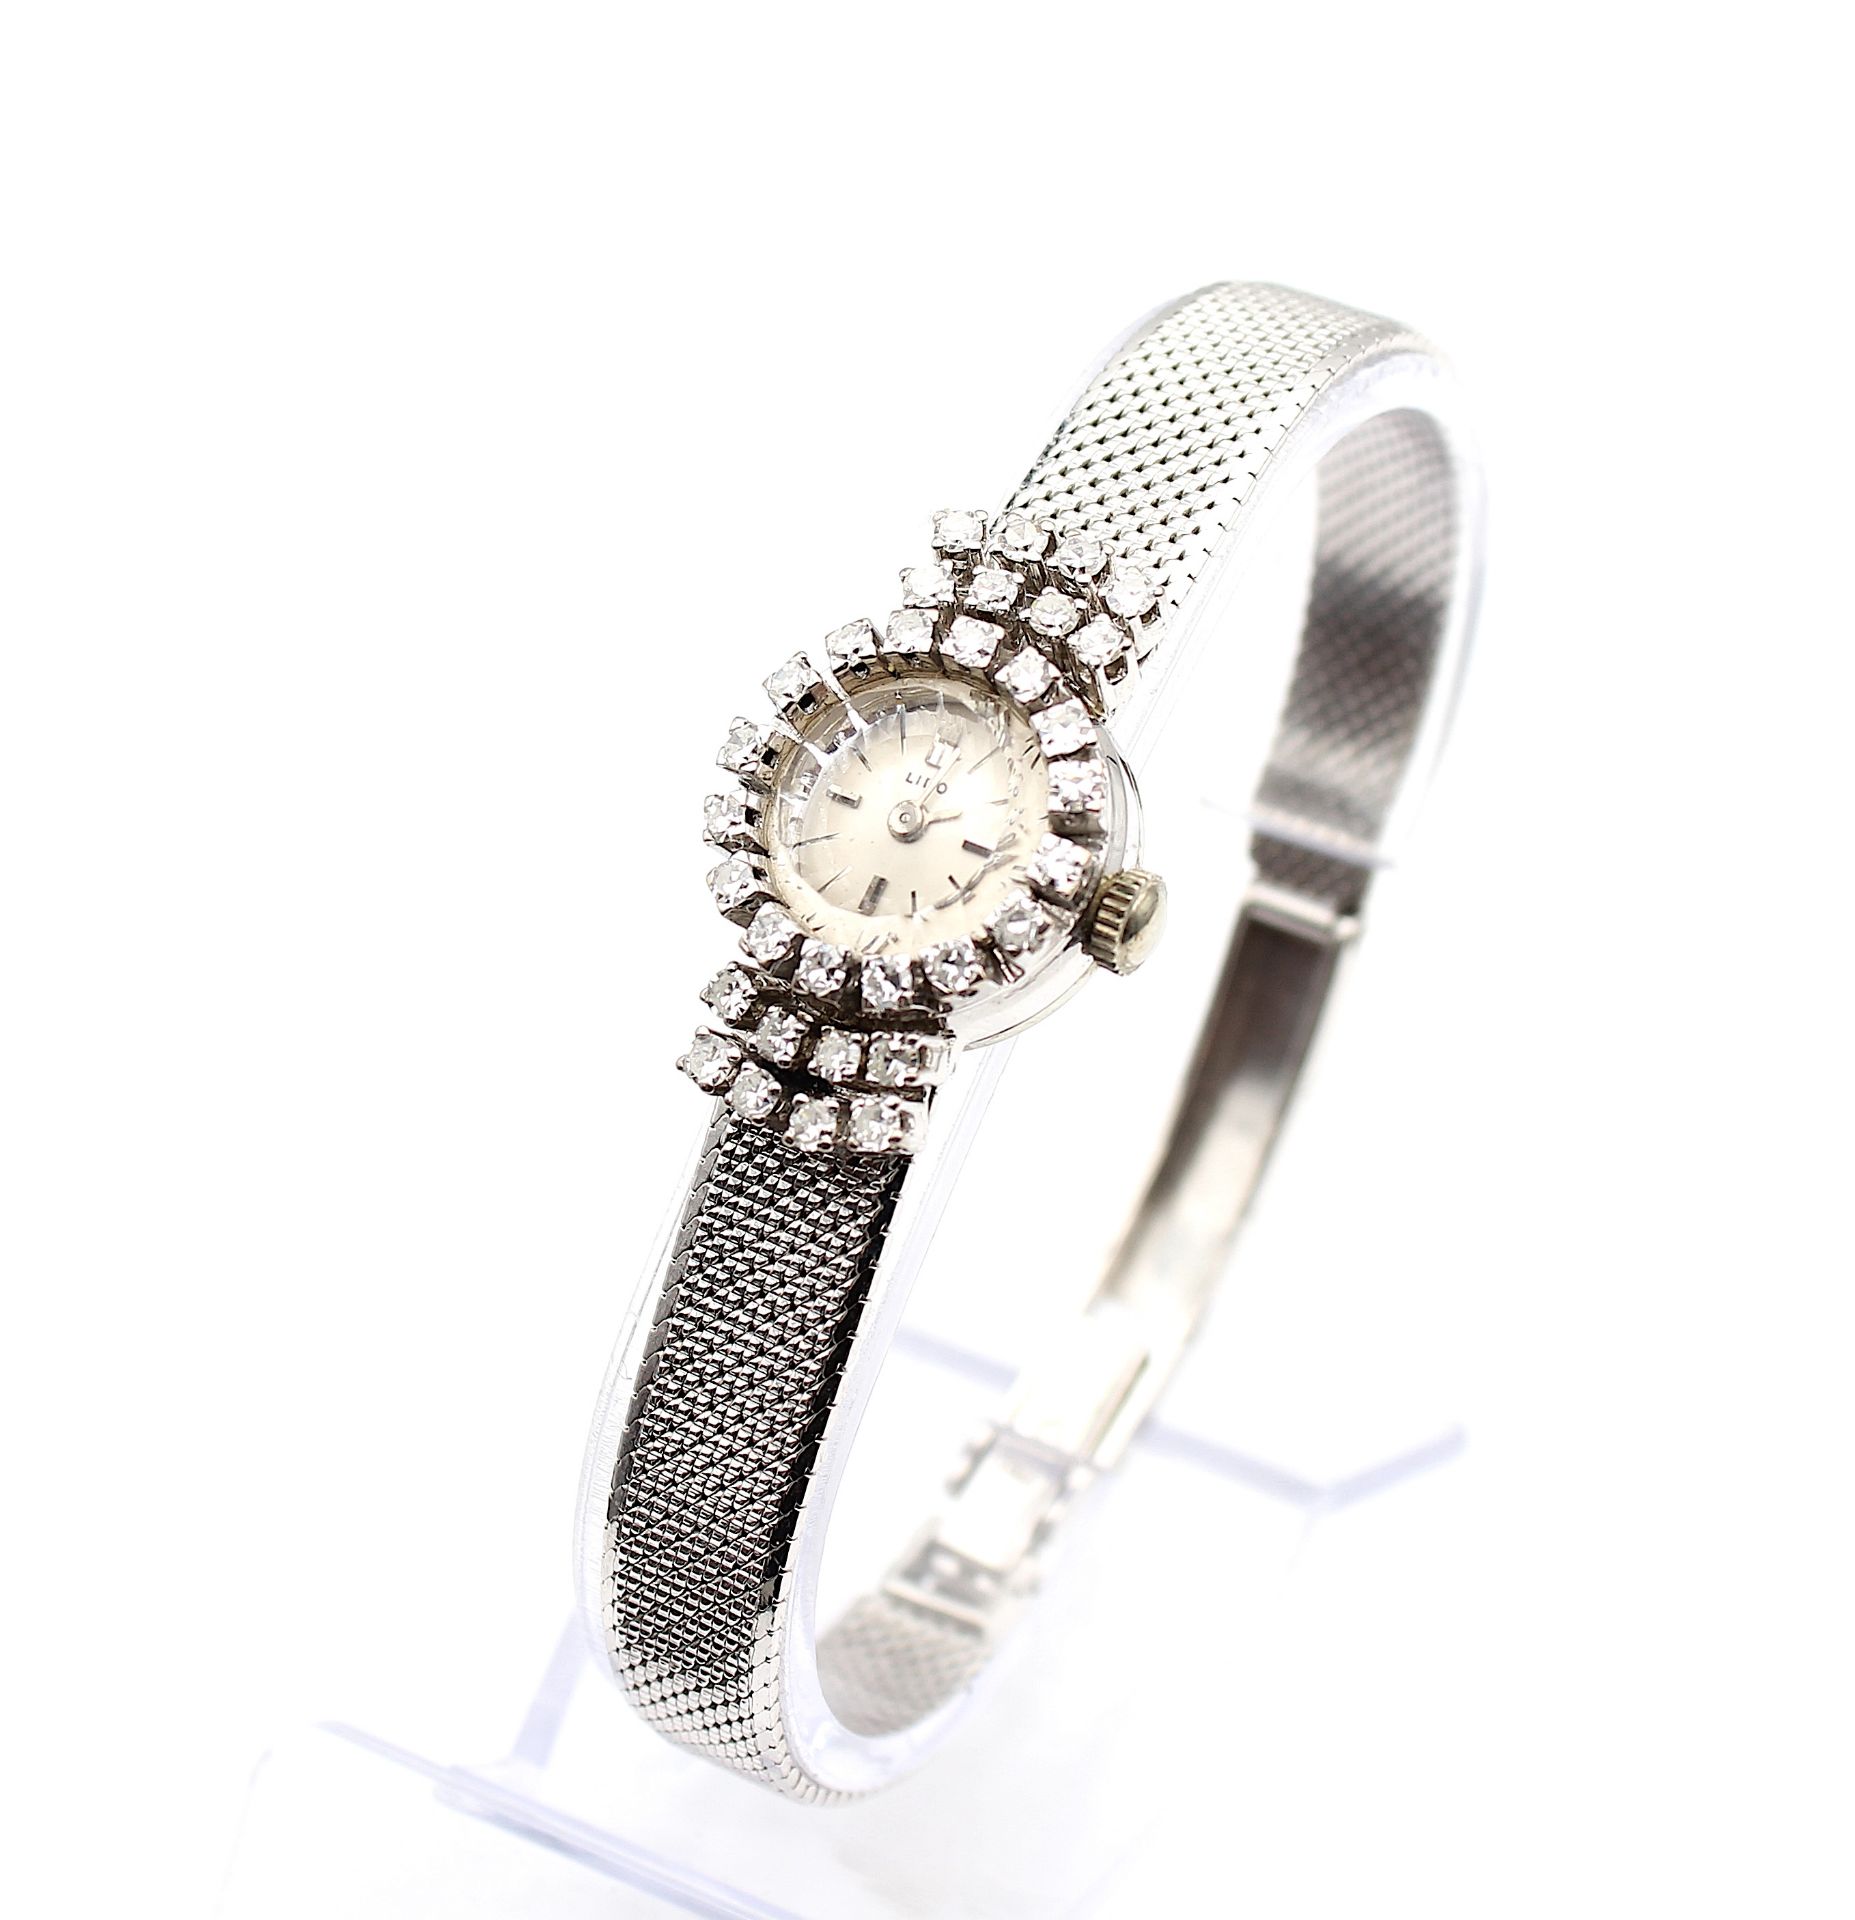 Vintage ladies wrist watch with diamonds, total ca. 0,70 ct - Image 2 of 5